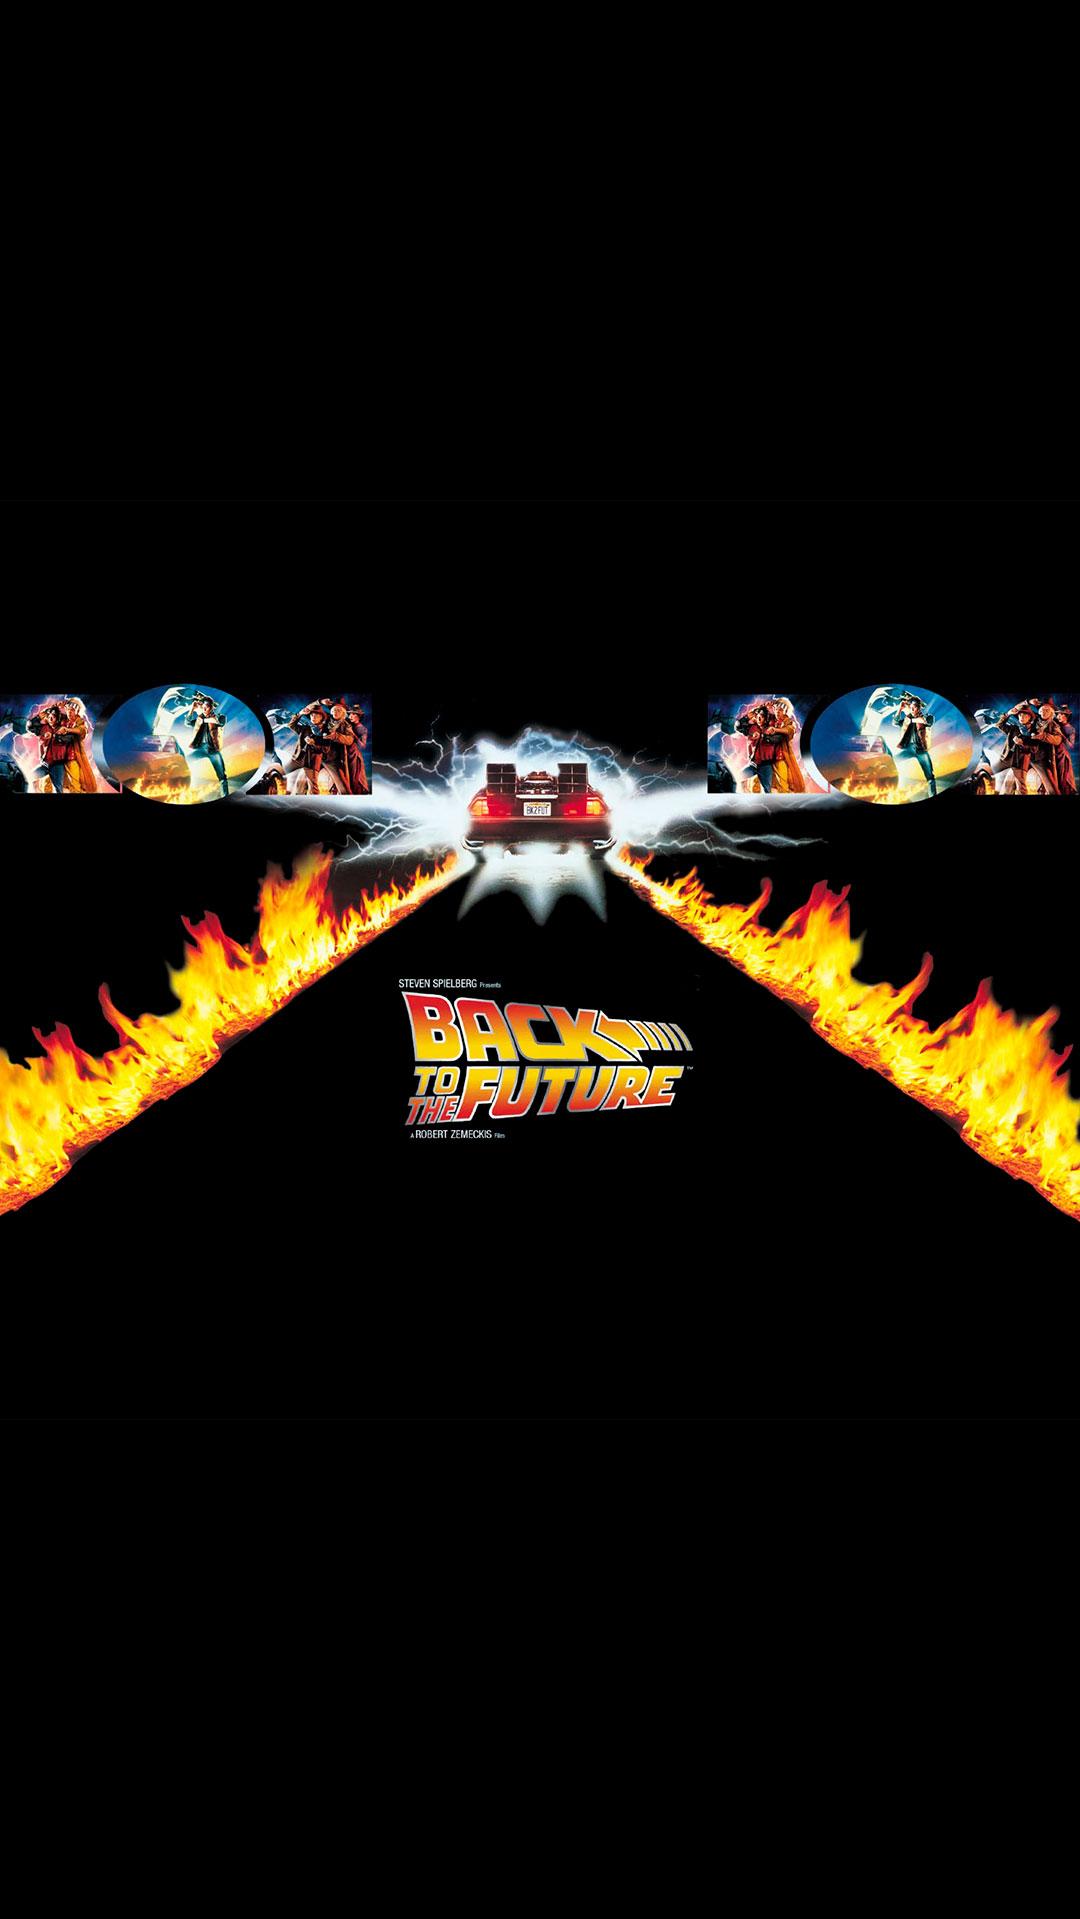 Back To The Future Wallpaper For iPhone Pro Max X